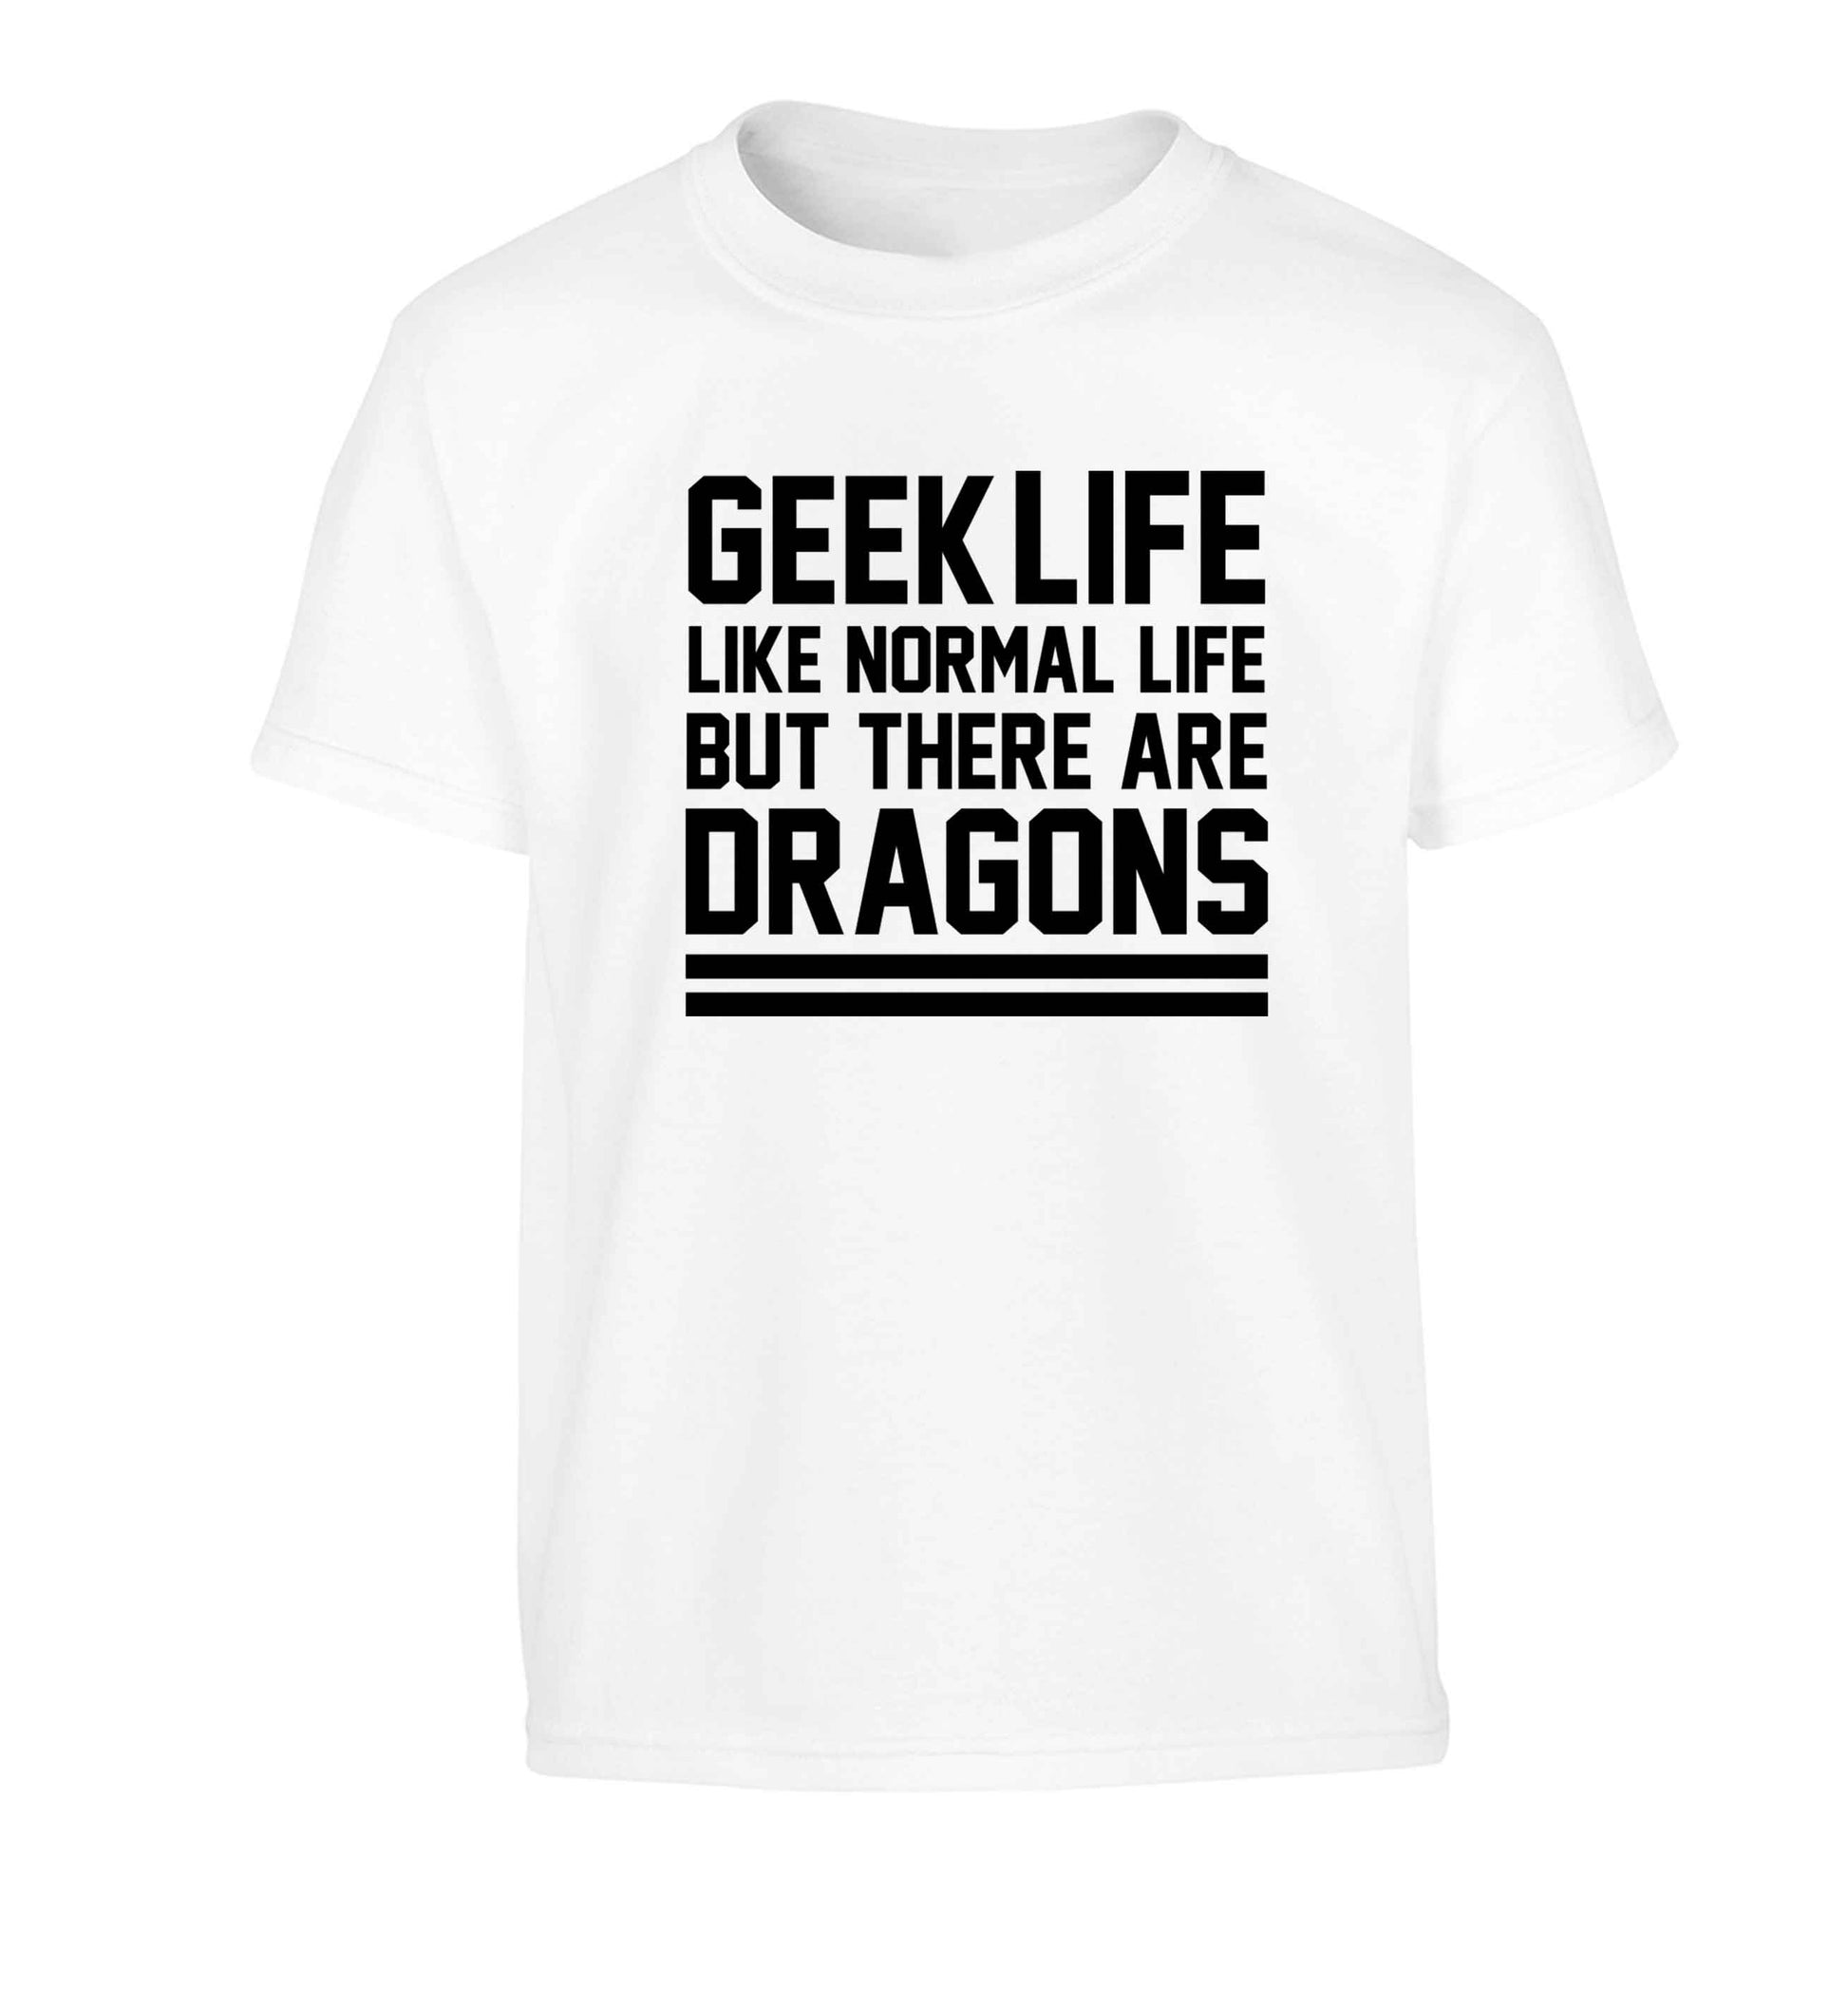 Geek life like normal life but there are dragons Children's white Tshirt 12-13 Years